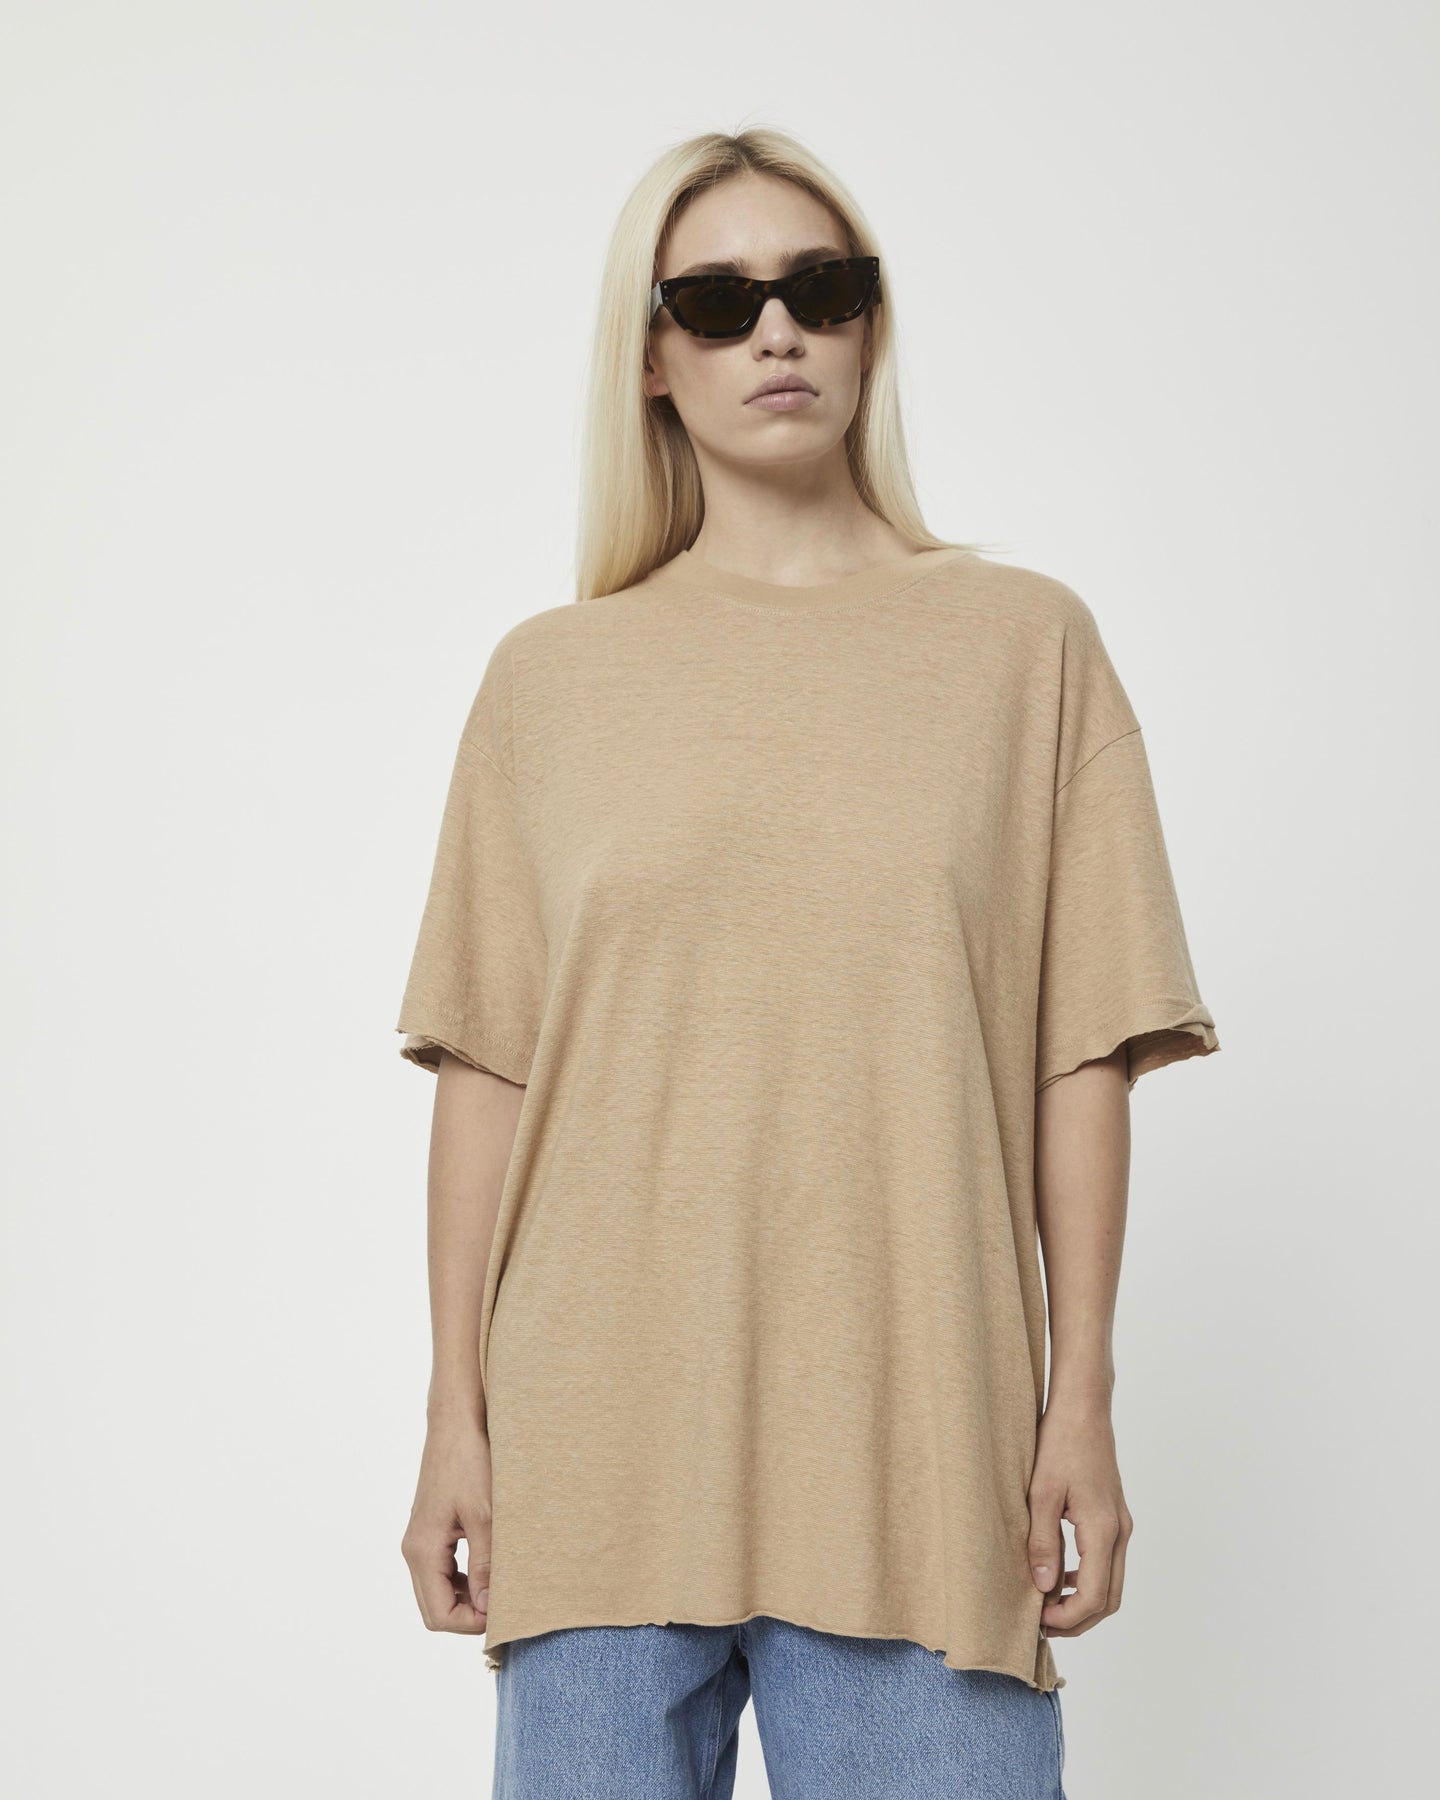 the Afends Women's Slay Oversized Tee in Tan on a model